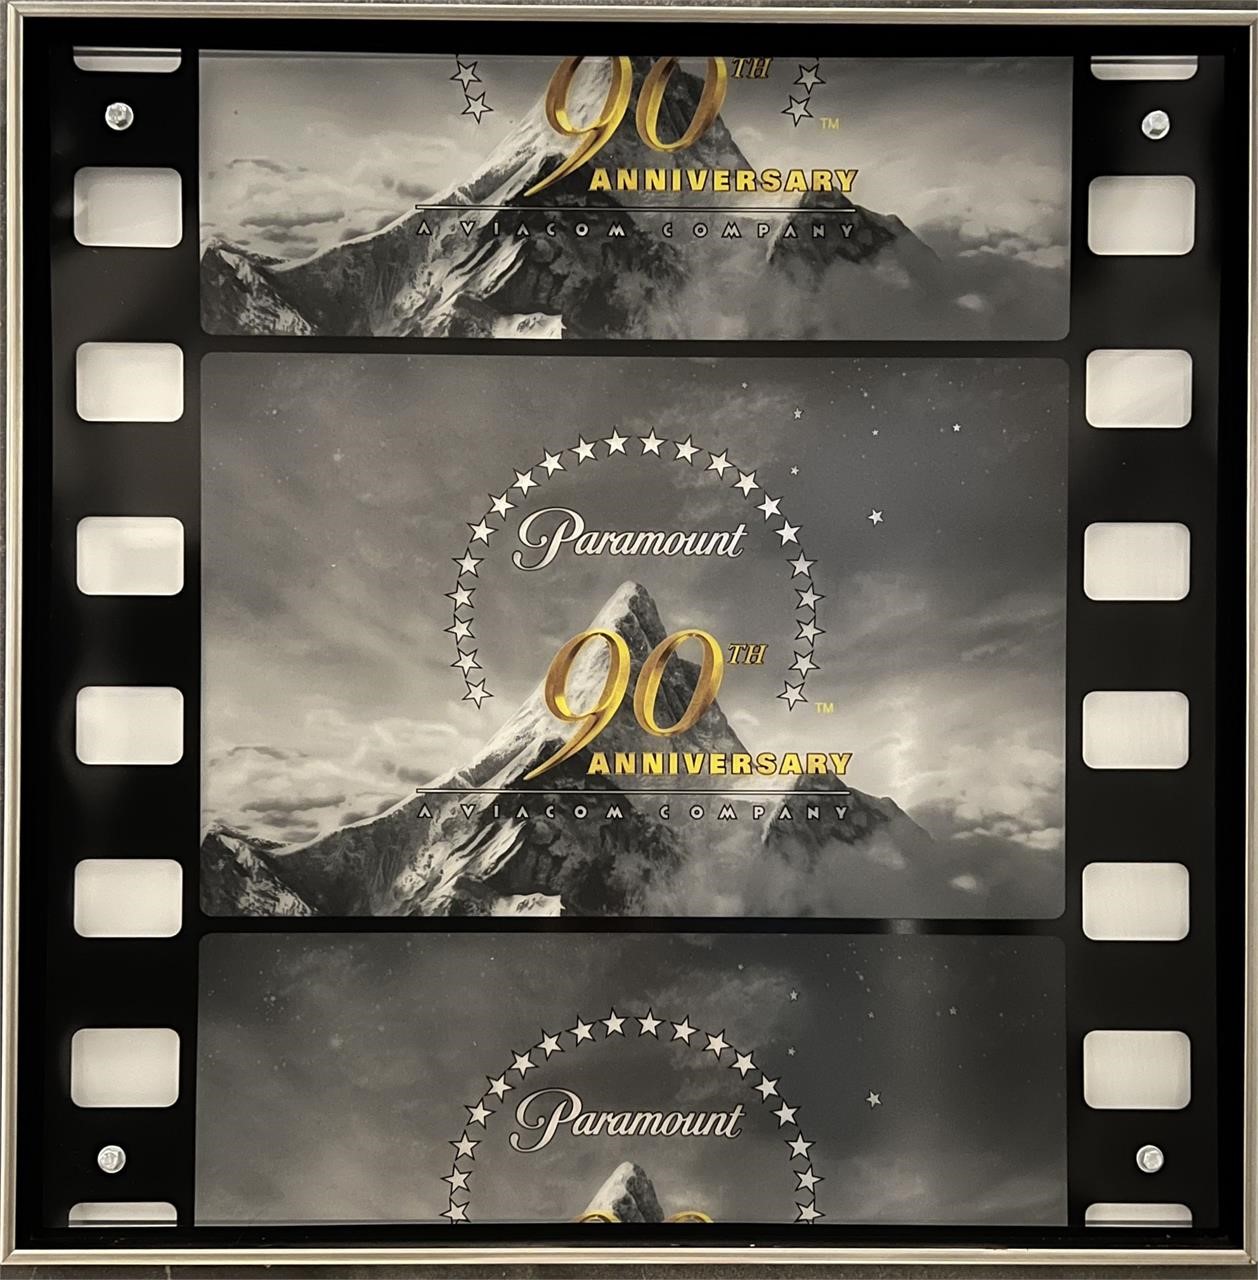 Paramount Pictures 90th Anniversary commemorative